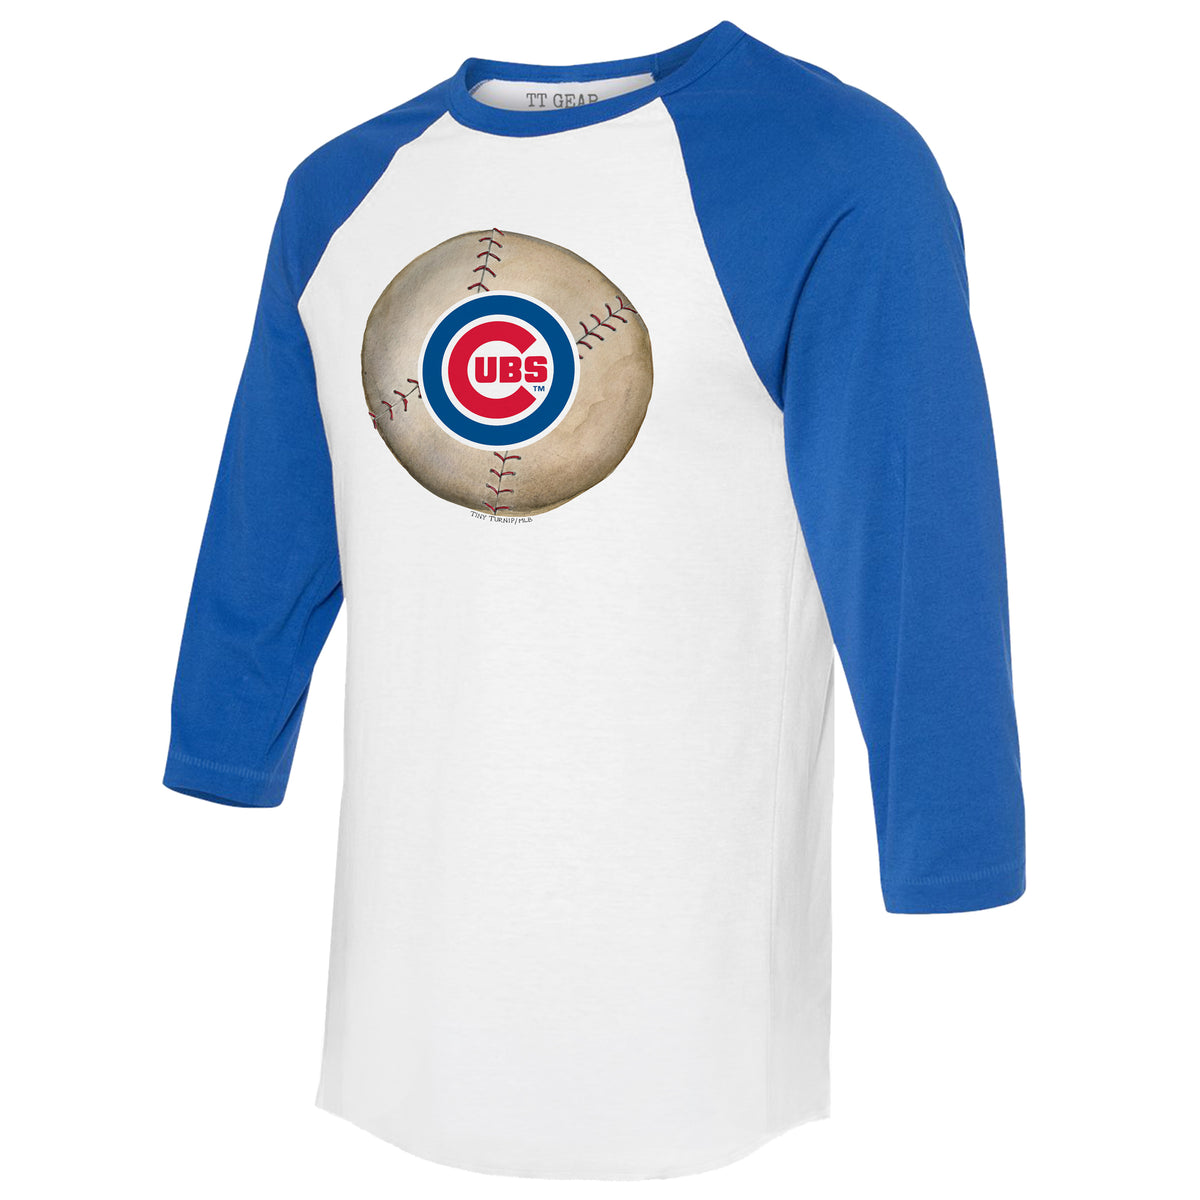 Chicago Cubs Tiny Turnip Women's Heart Banner T-Shirt - White in 2023